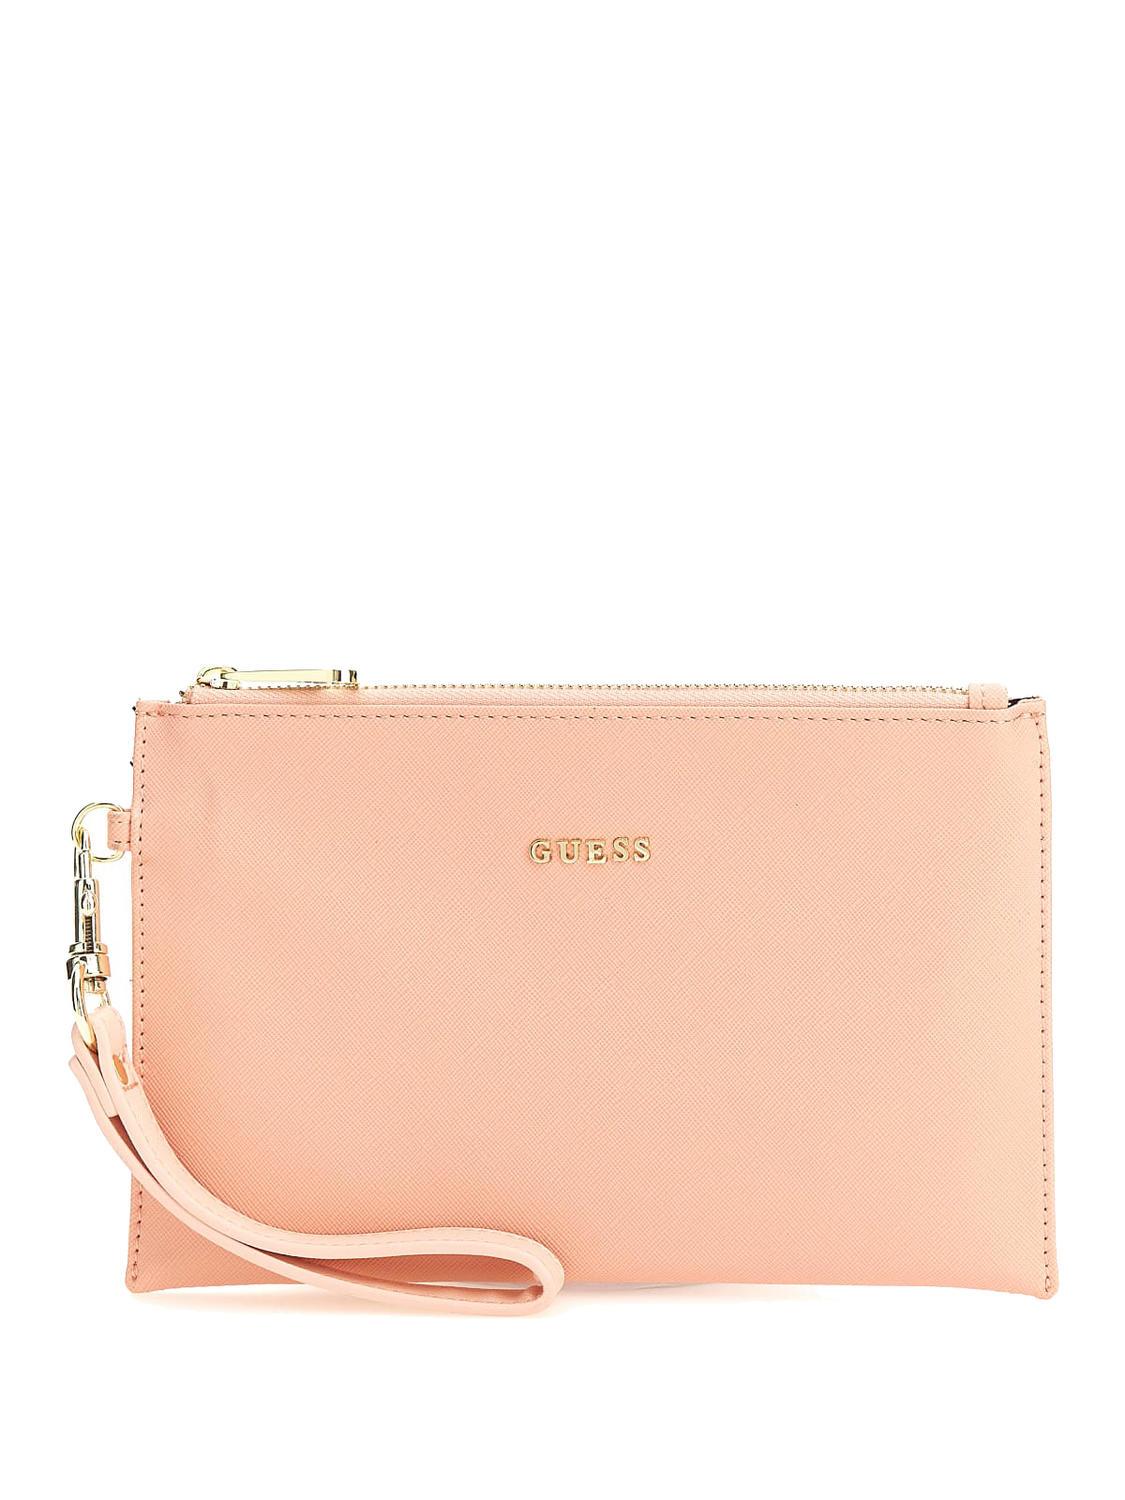 Guess Pochette Piatta Top Zip Pale Roses - Buy At Outlet Prices!